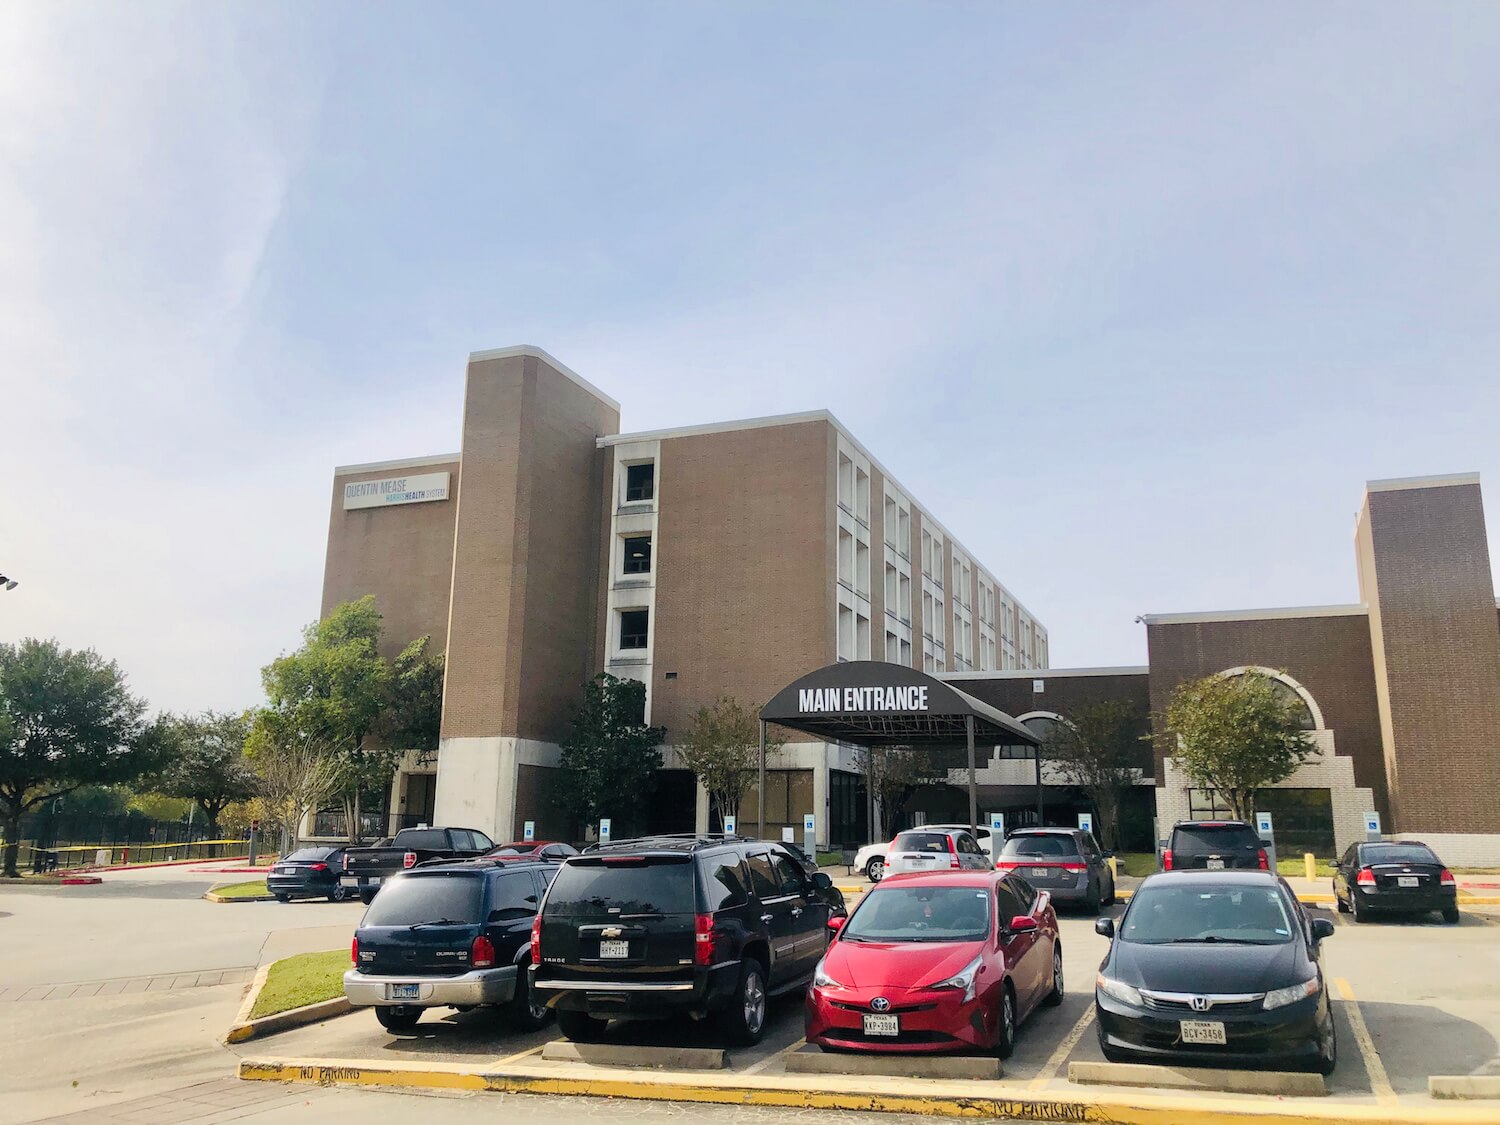 Quentin Mease Hospital on November 12, 2019.